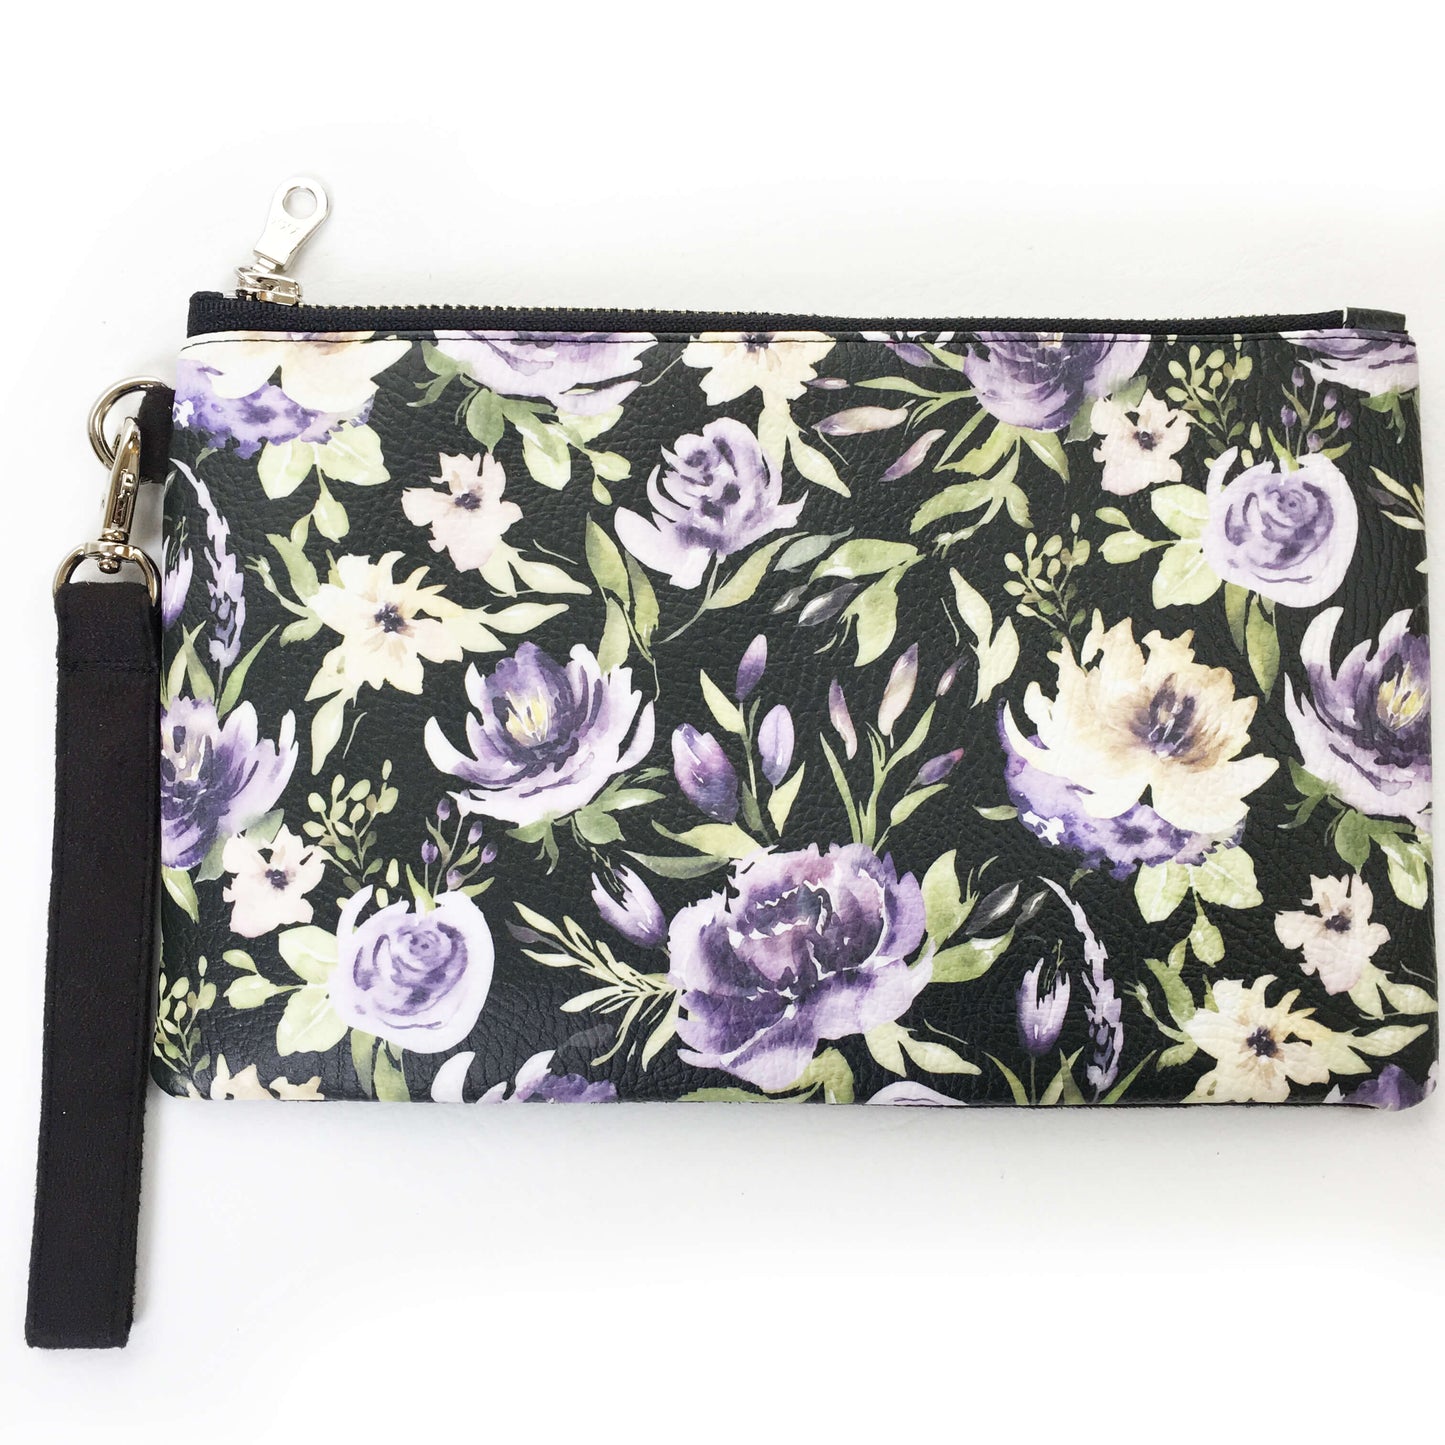 Watercolor mixed floral on black wristlet - vegan leather/suede - UndertheLeafDesigns.com